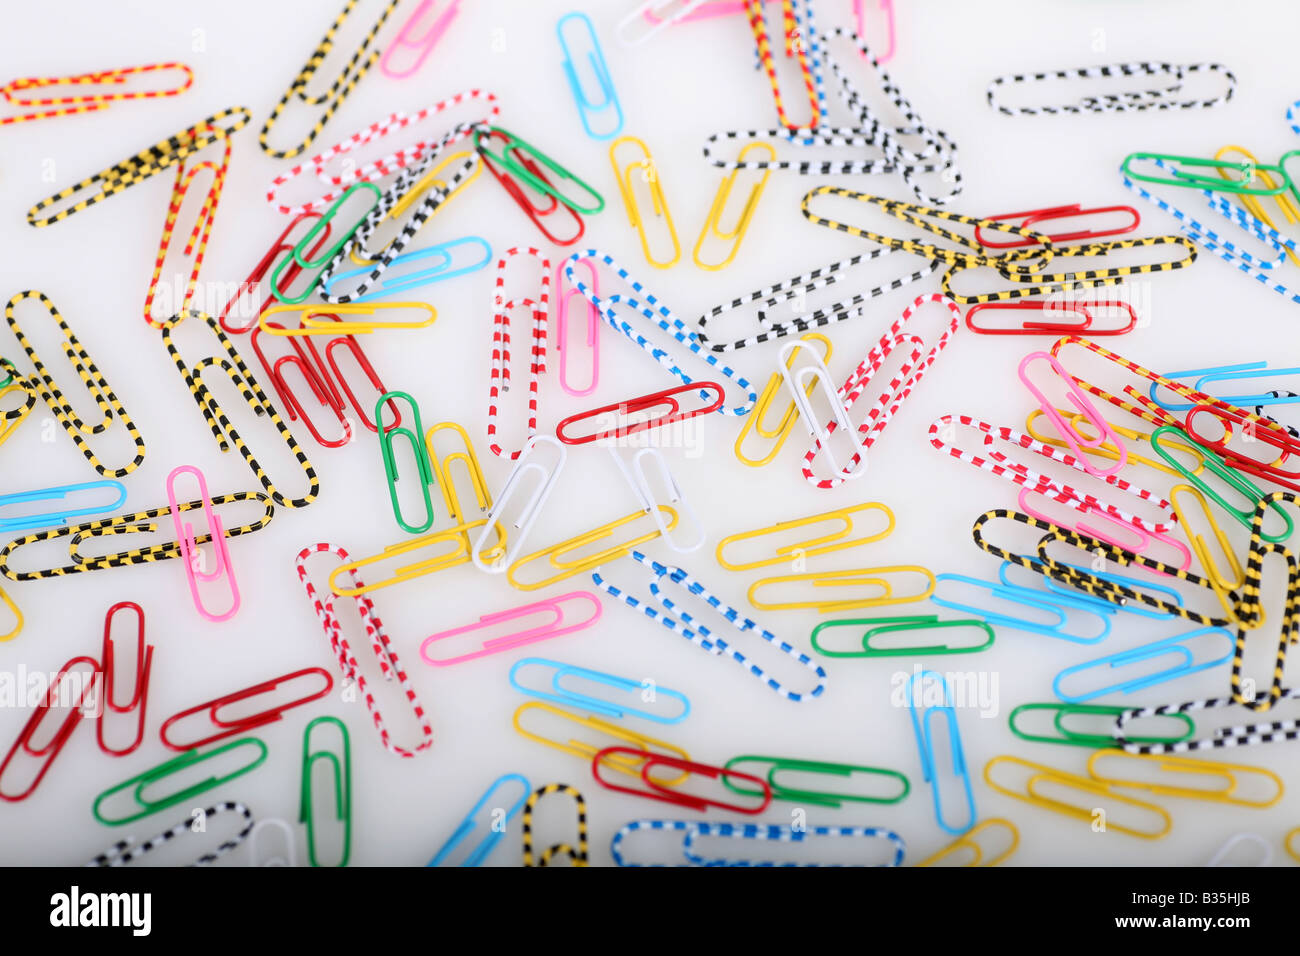 Coloured and patterned paper clips on a white background Stock Photo